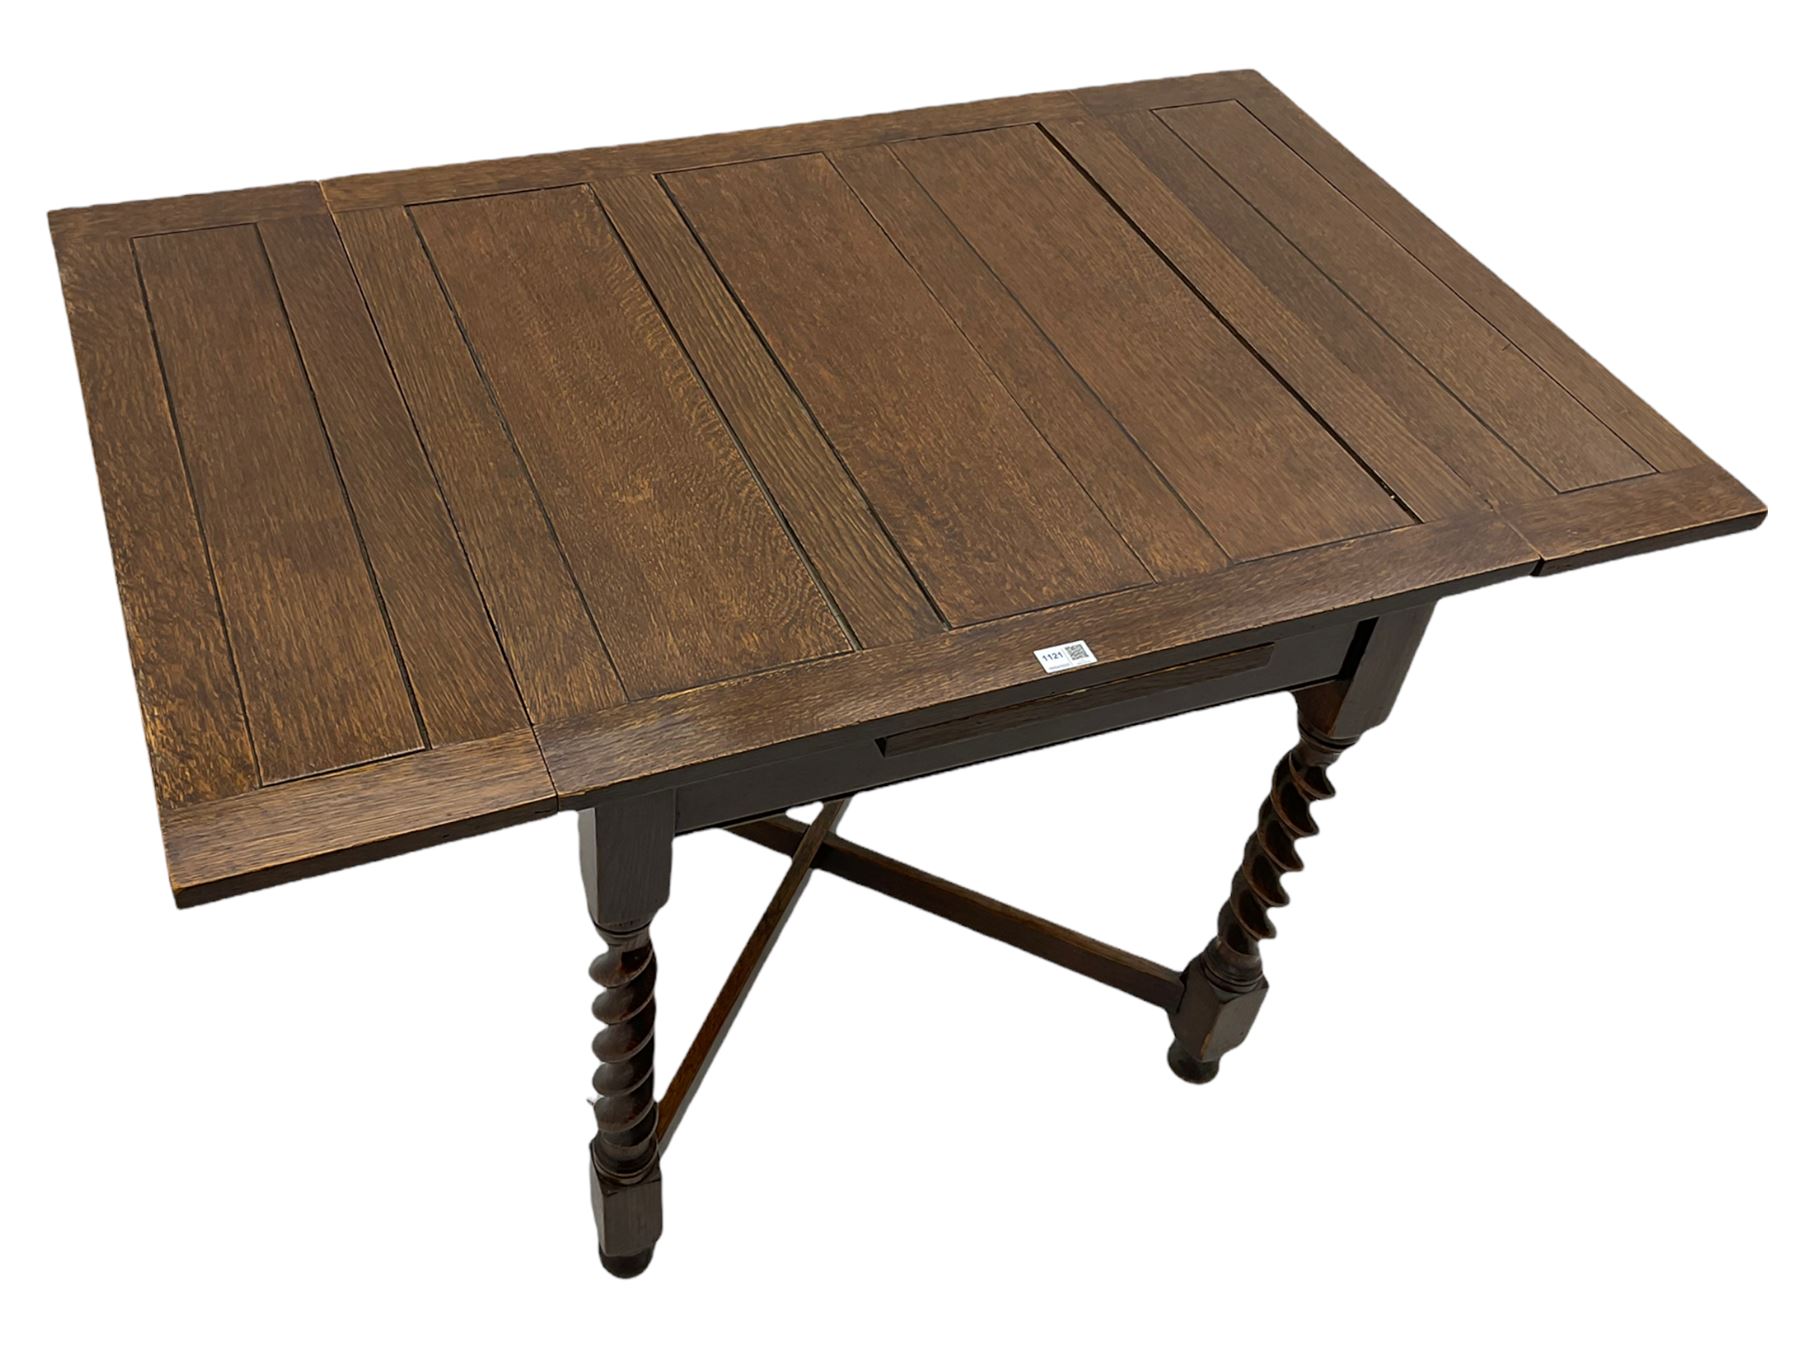 Early 20th century oak barley twist drawer leaf dining table - Image 10 of 10